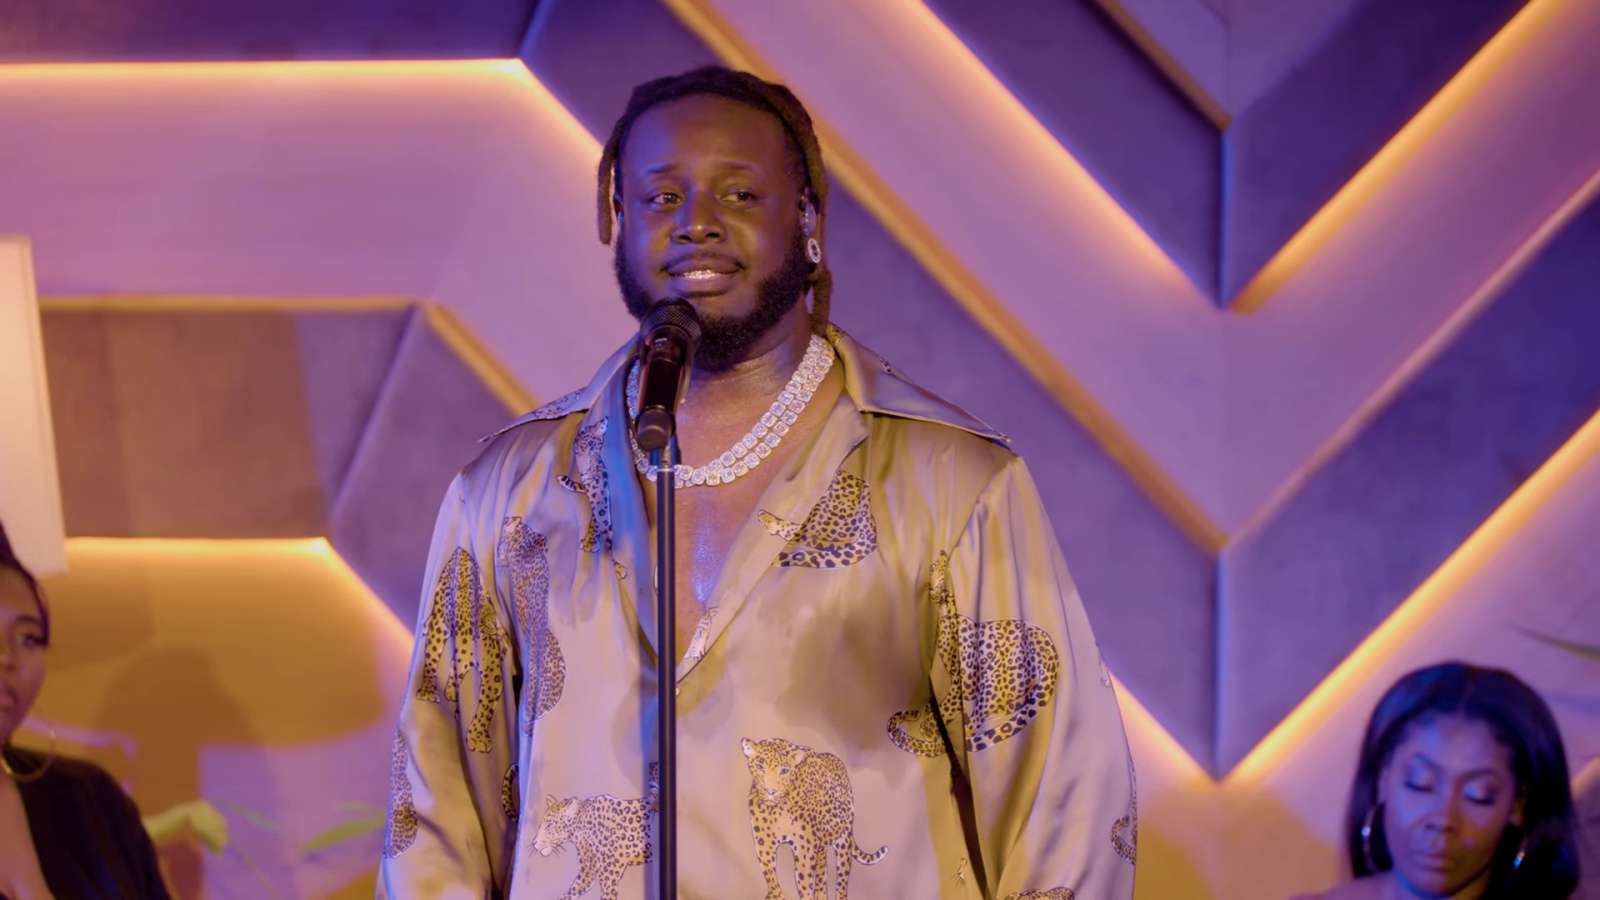 T-Pain performs onstage at a concert